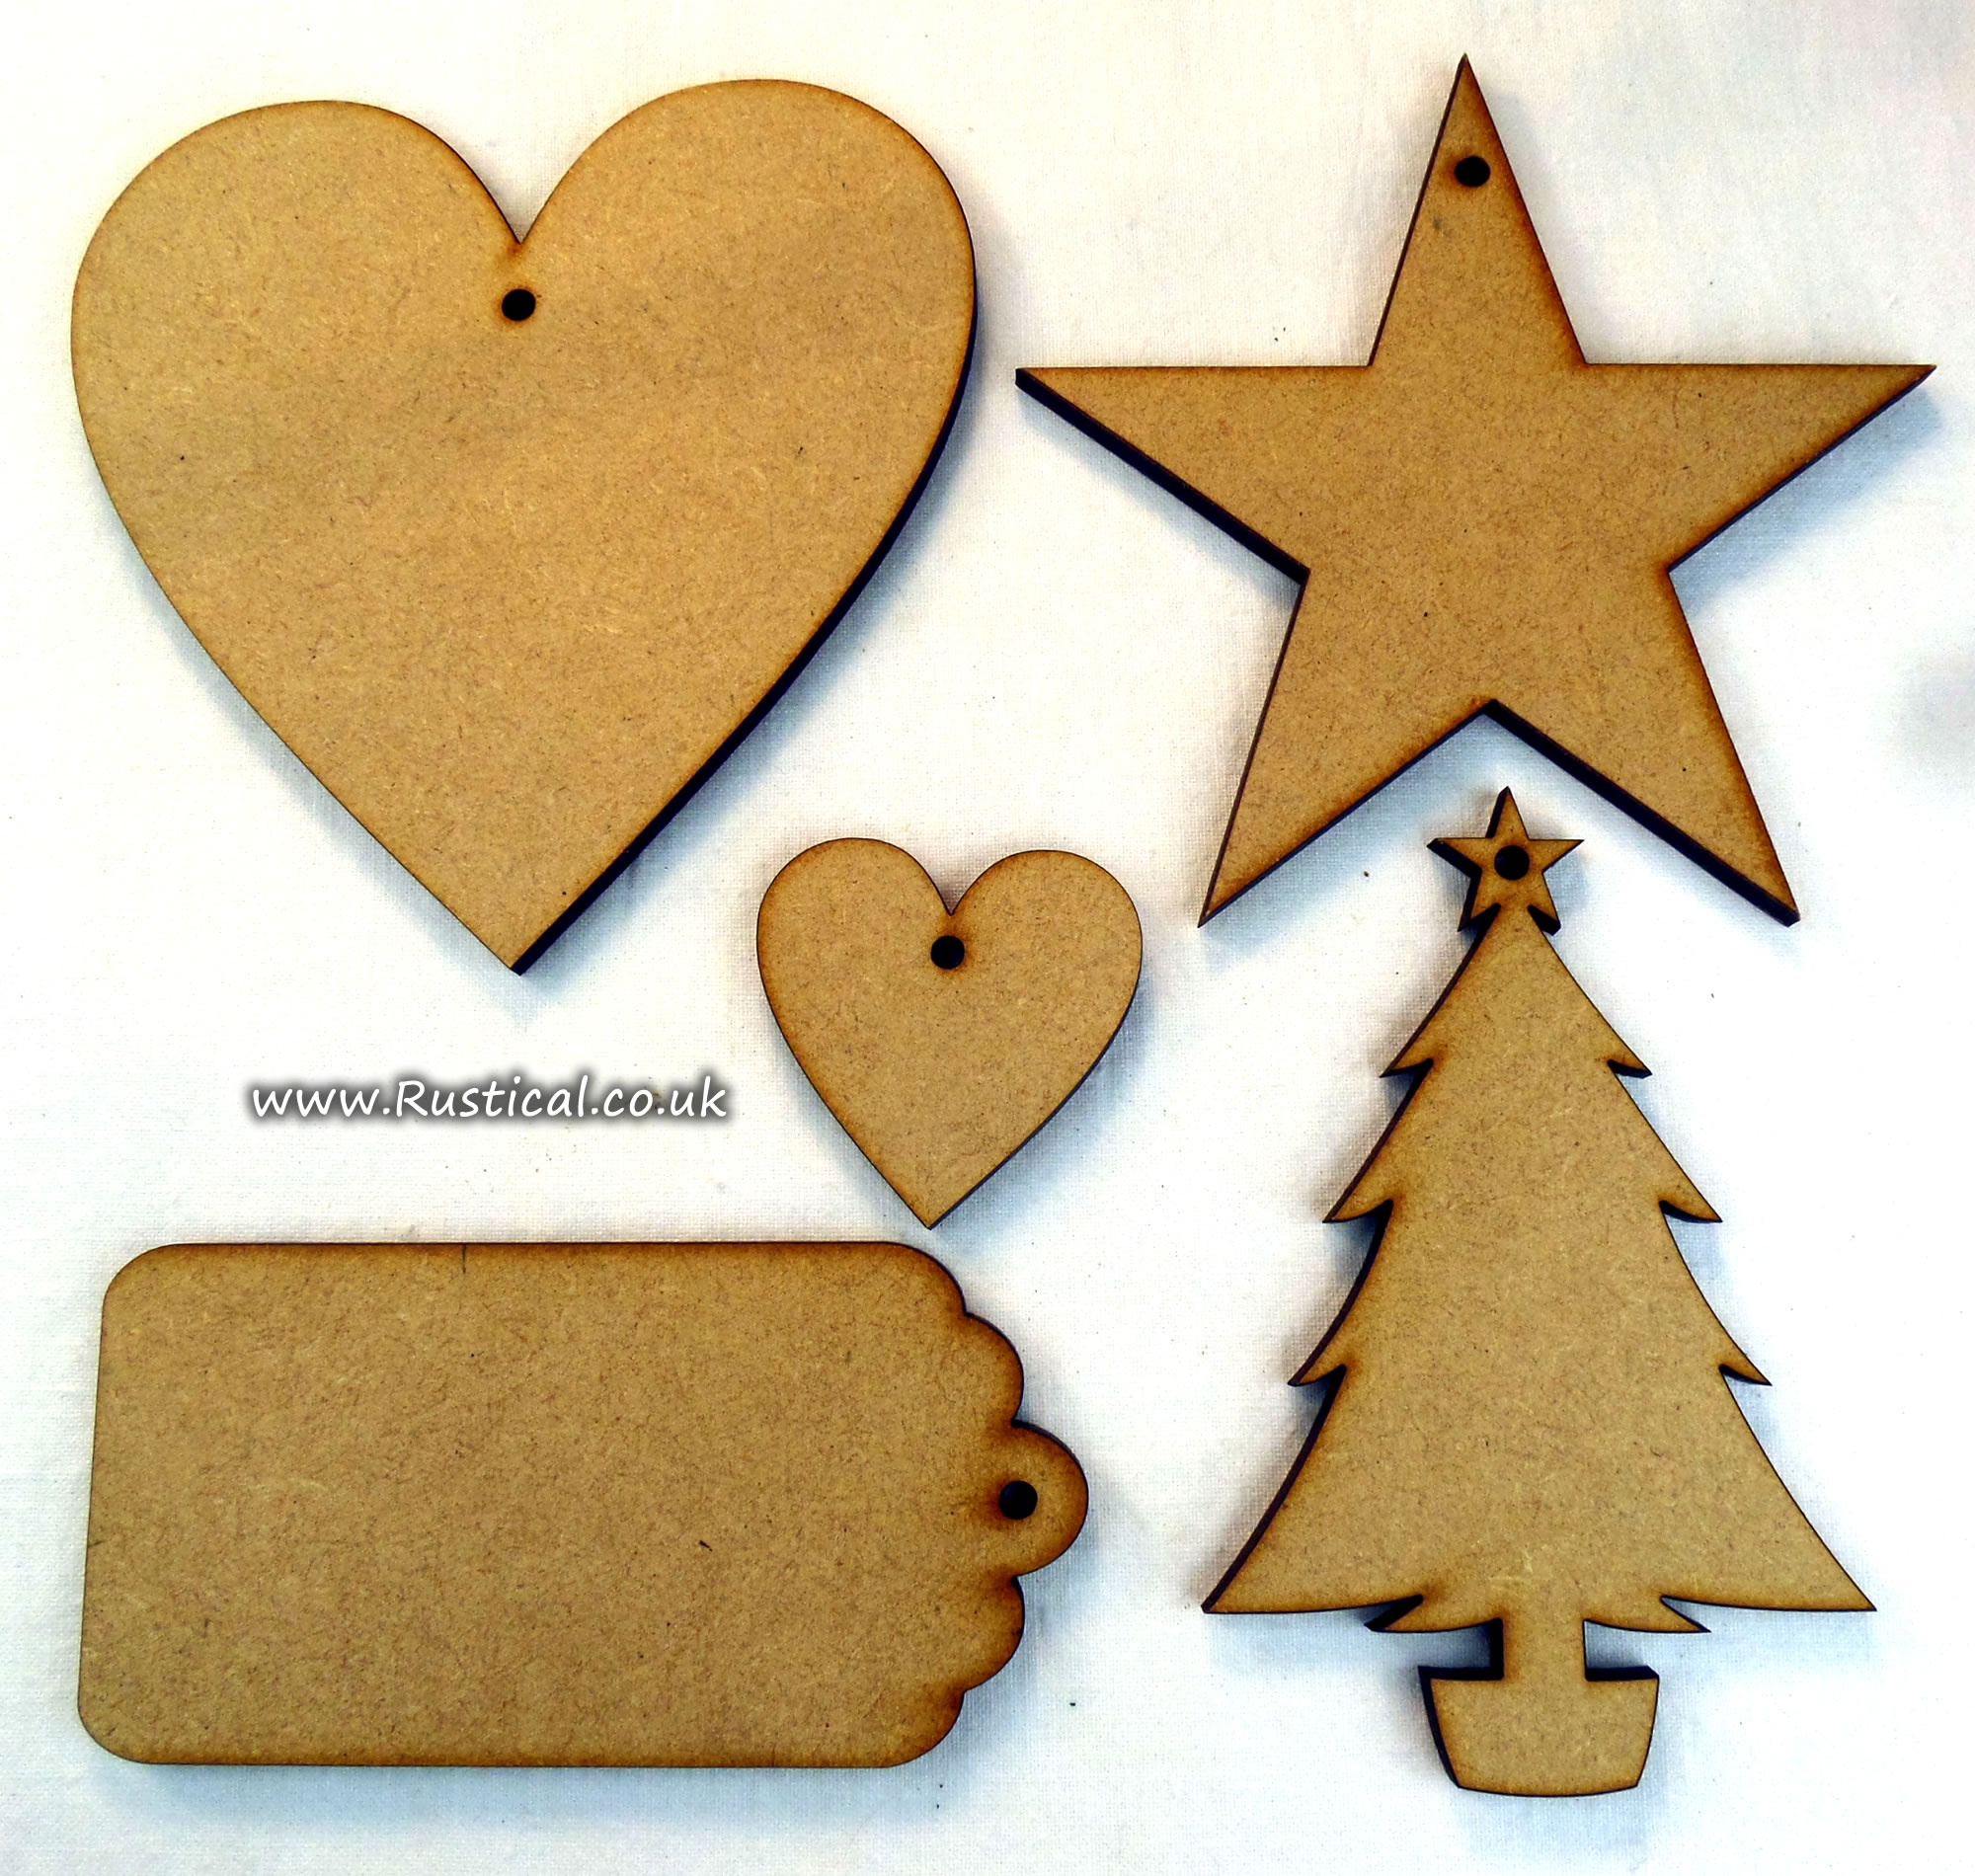 mdf shapes for craft projects or shop price tags